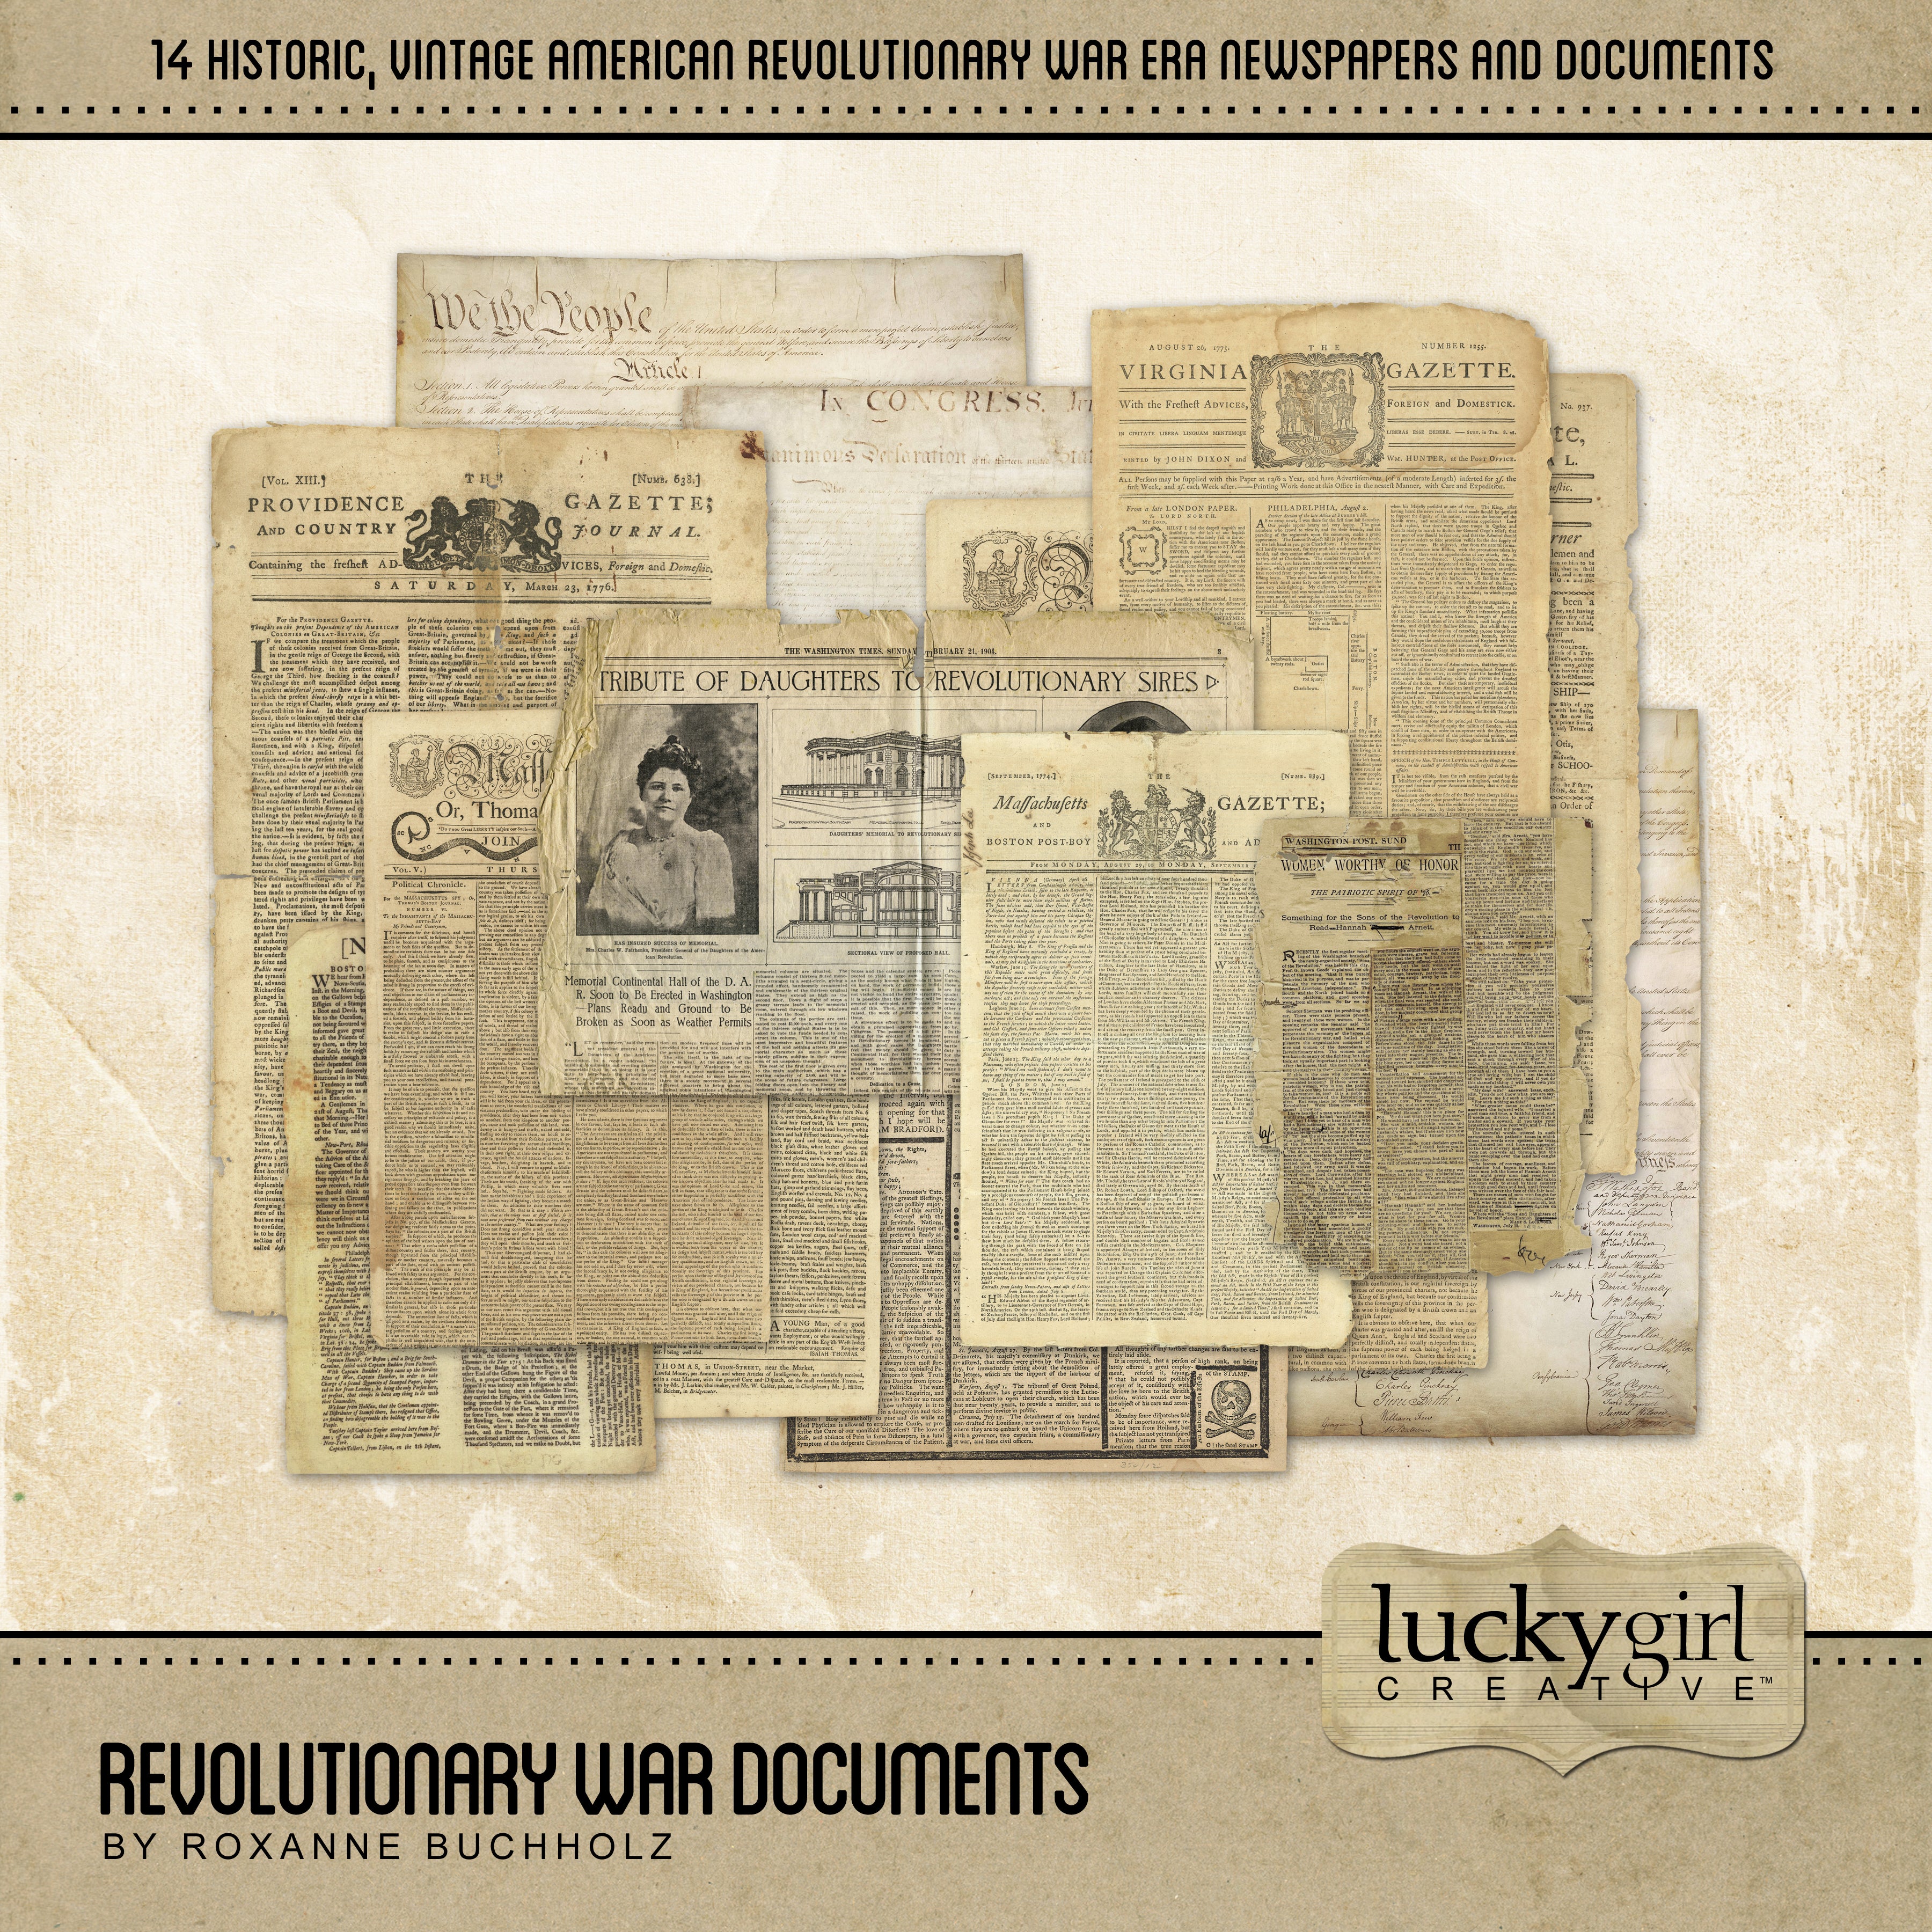 Extensively researched, this vintage American Revolutionary War Documents Digital Scrapbook Kit is great for family genealogy projects. It showcases 14 antique digital art newspapers from around 1775 - 1783 when the 13 American colonies fought Great Britain for their freedom.